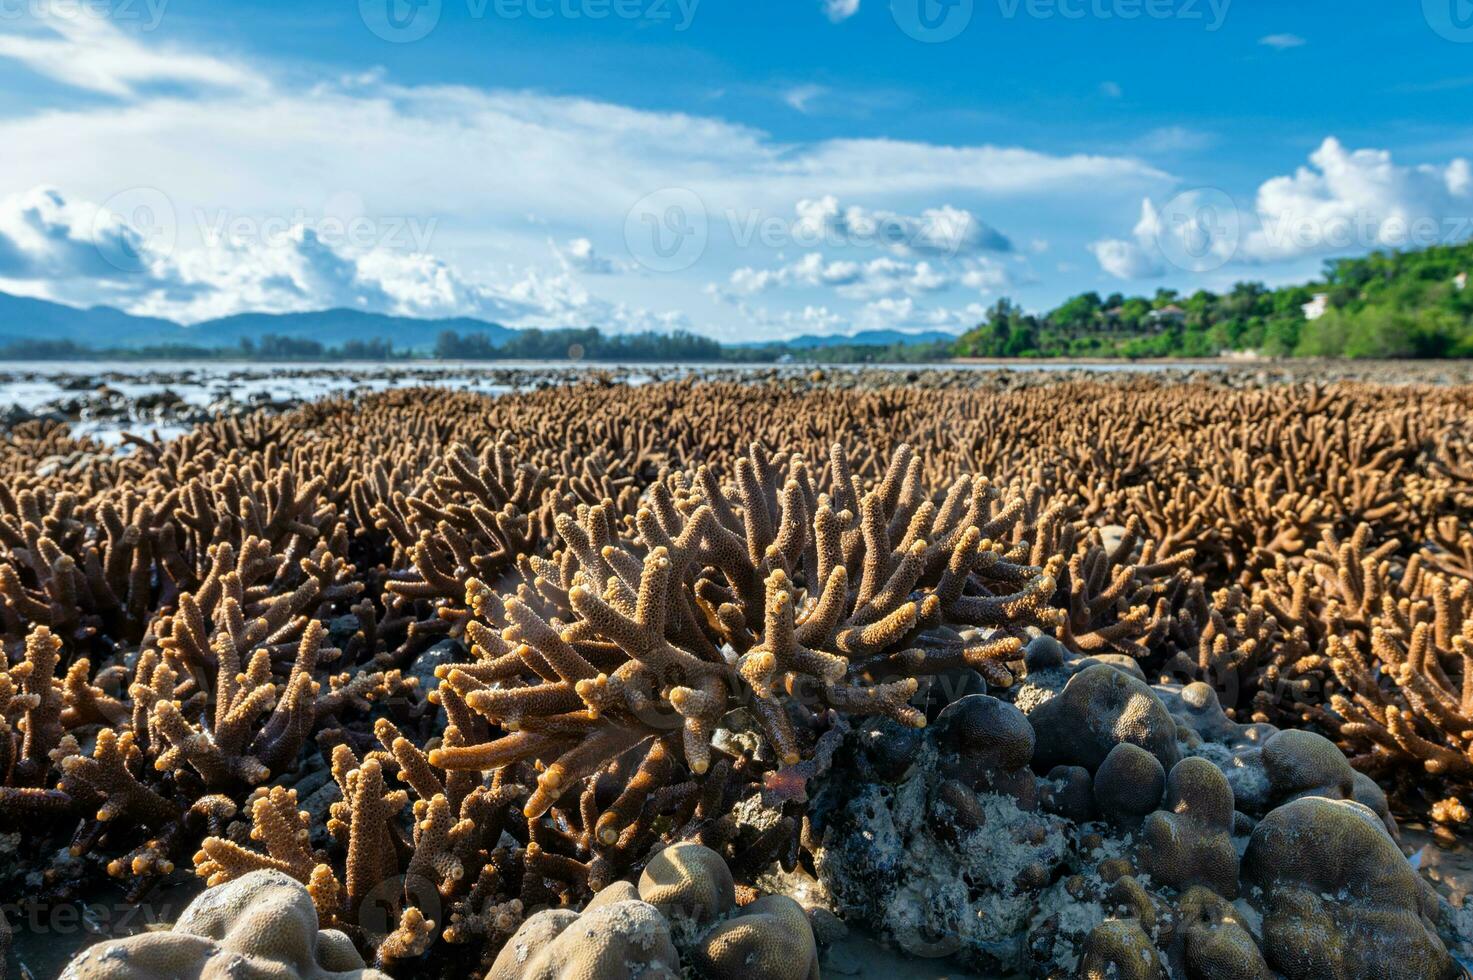 Staghorn coral during low tide at Phuket, Thailand photo